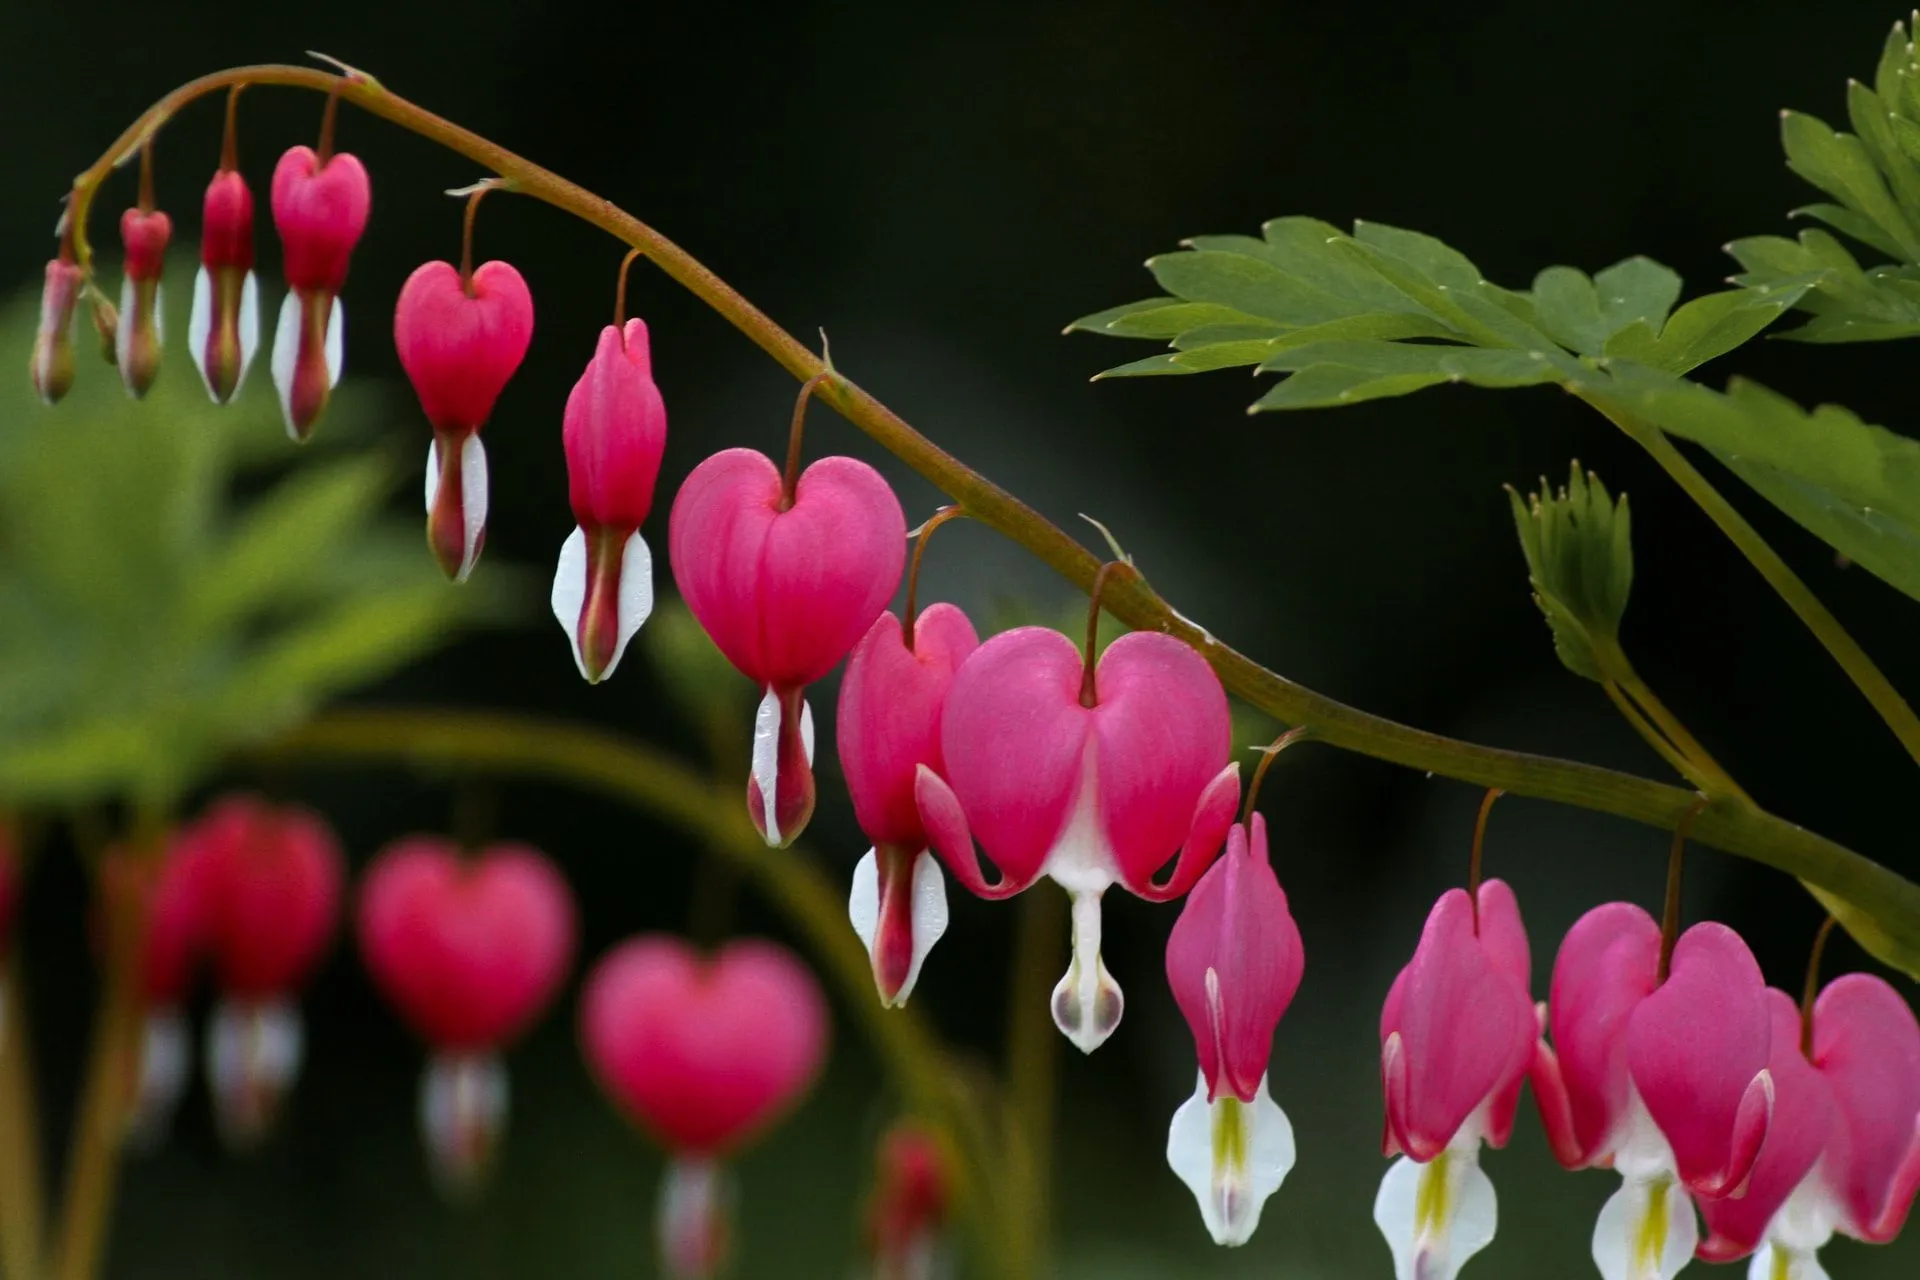 Raceme is the horizontal clusters in which the heart-shaped flowers of bleeding hearts are arranged.